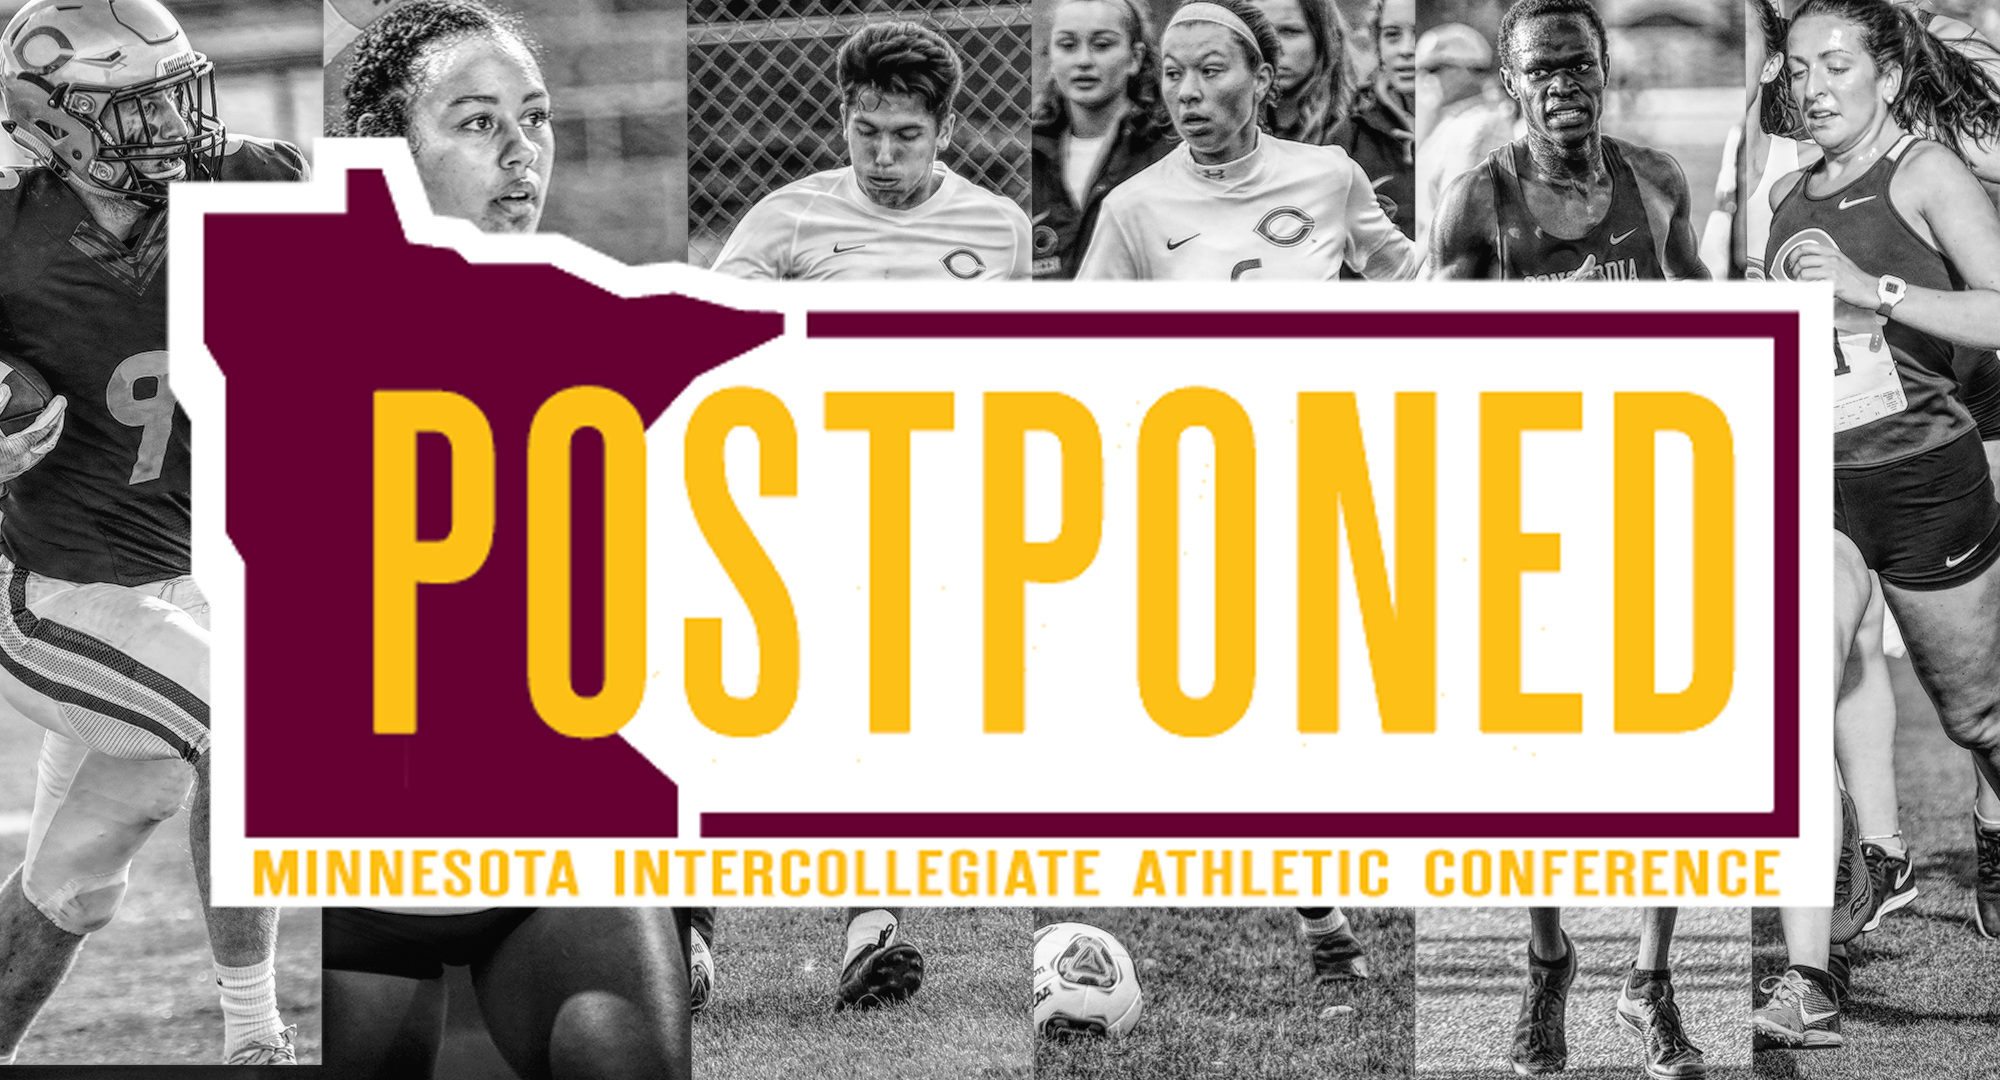 The MIAC office announced today that football, volleyball, men’s soccer, women’s soccer, men’s cross country and women’s cross country have been postponed until the spring season.